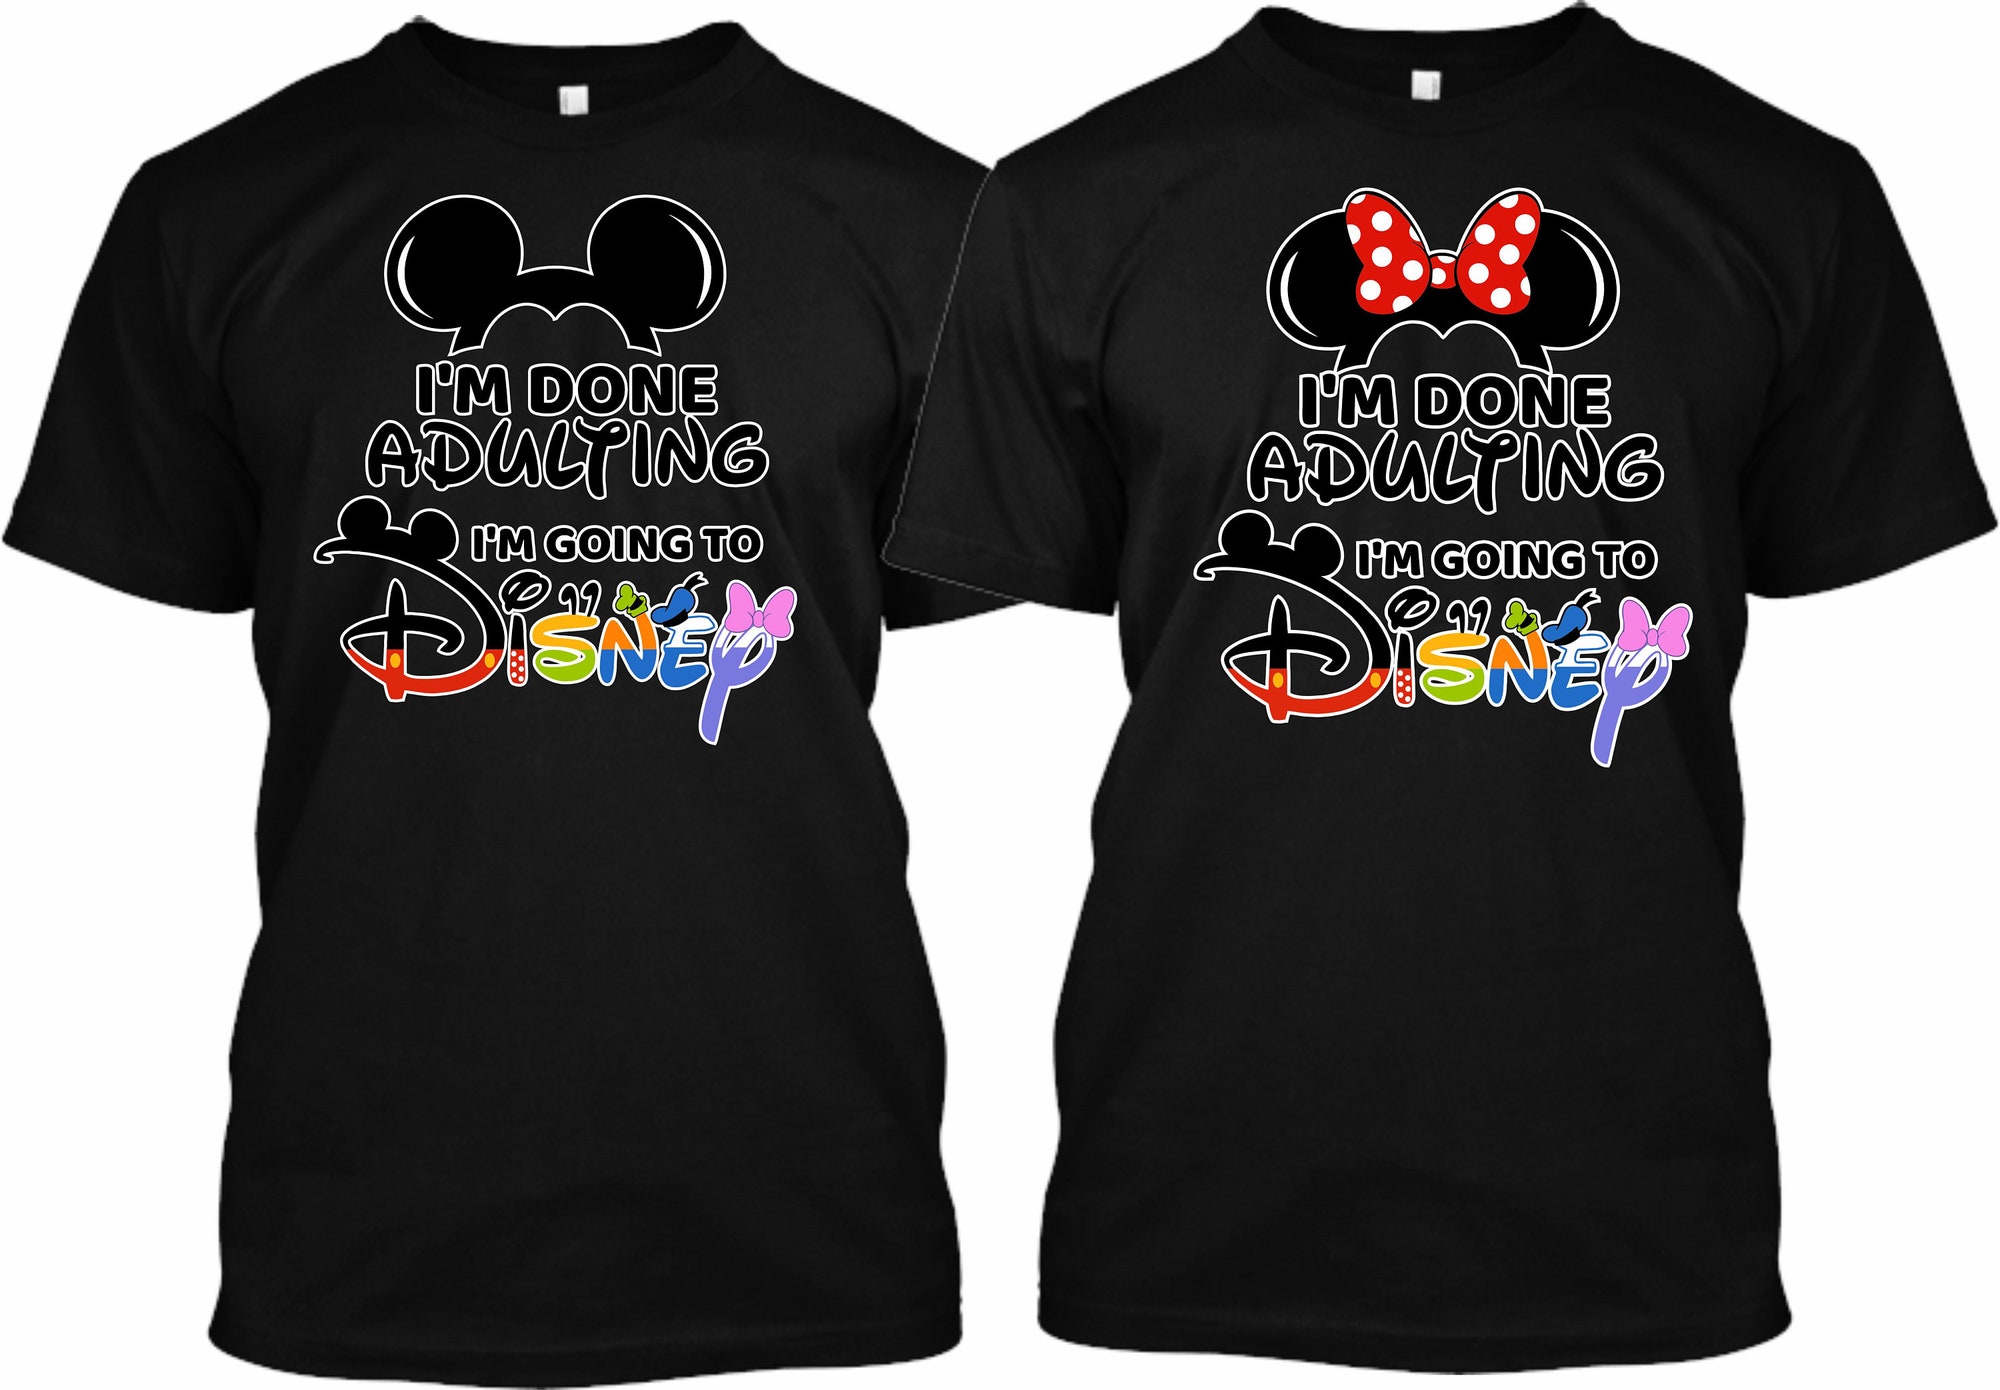 I'm Done Adulting let go to Disneyland Mickey Minnie Family Vacation Disney 2022 Best Trip Custom Matching  T-Shirts